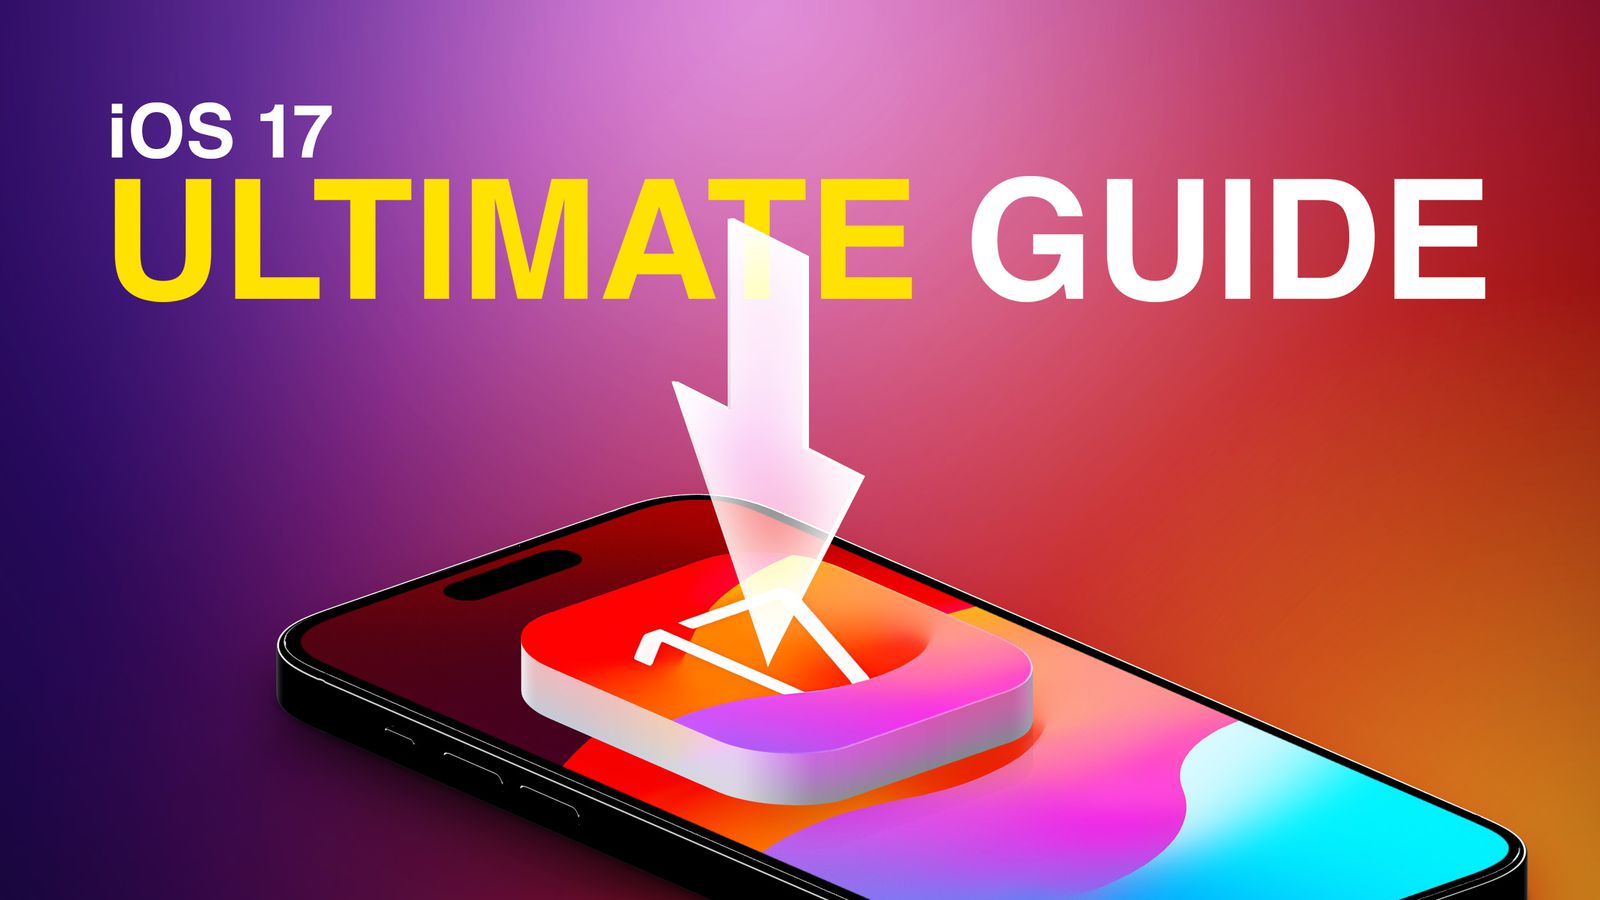 How to Hide Apps on iPhone: The Ultimate Guide